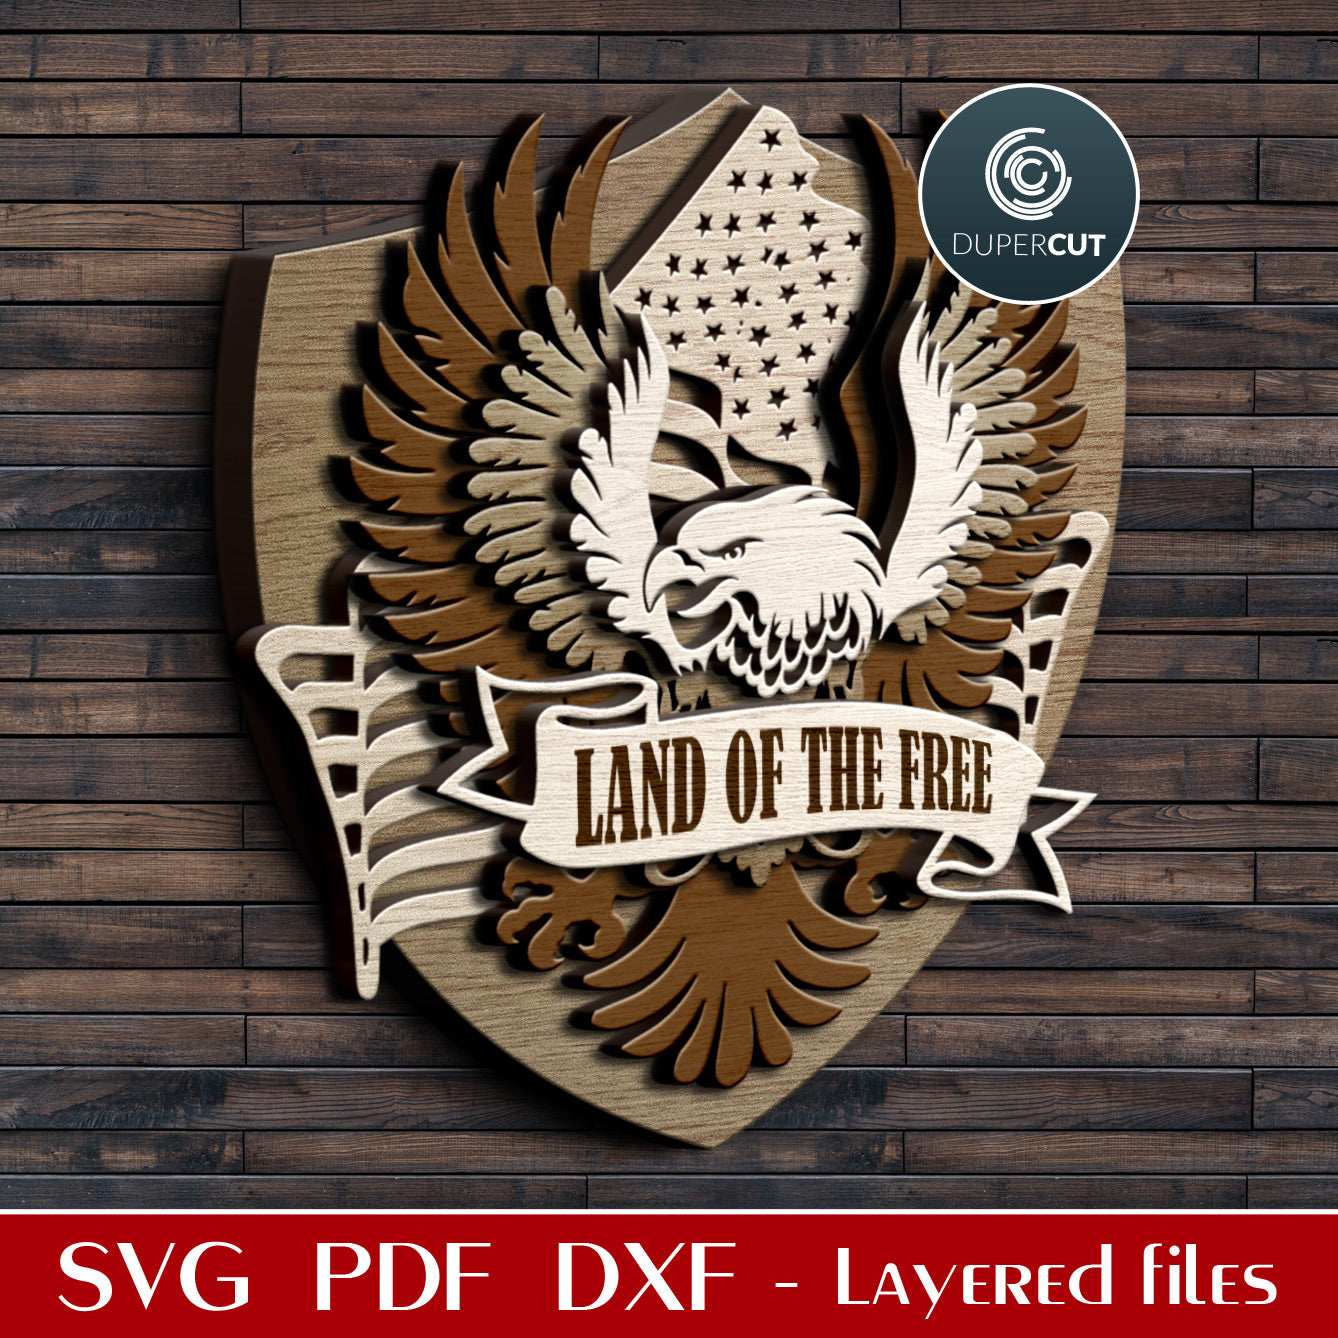 Bold eagle crest with USA flag - Independence Day decoration gift  - SVG DXF layered vector cutting files for Glowforge, Cricut, Silhouette Cameo, CNC plasma machines by DuperCut.com